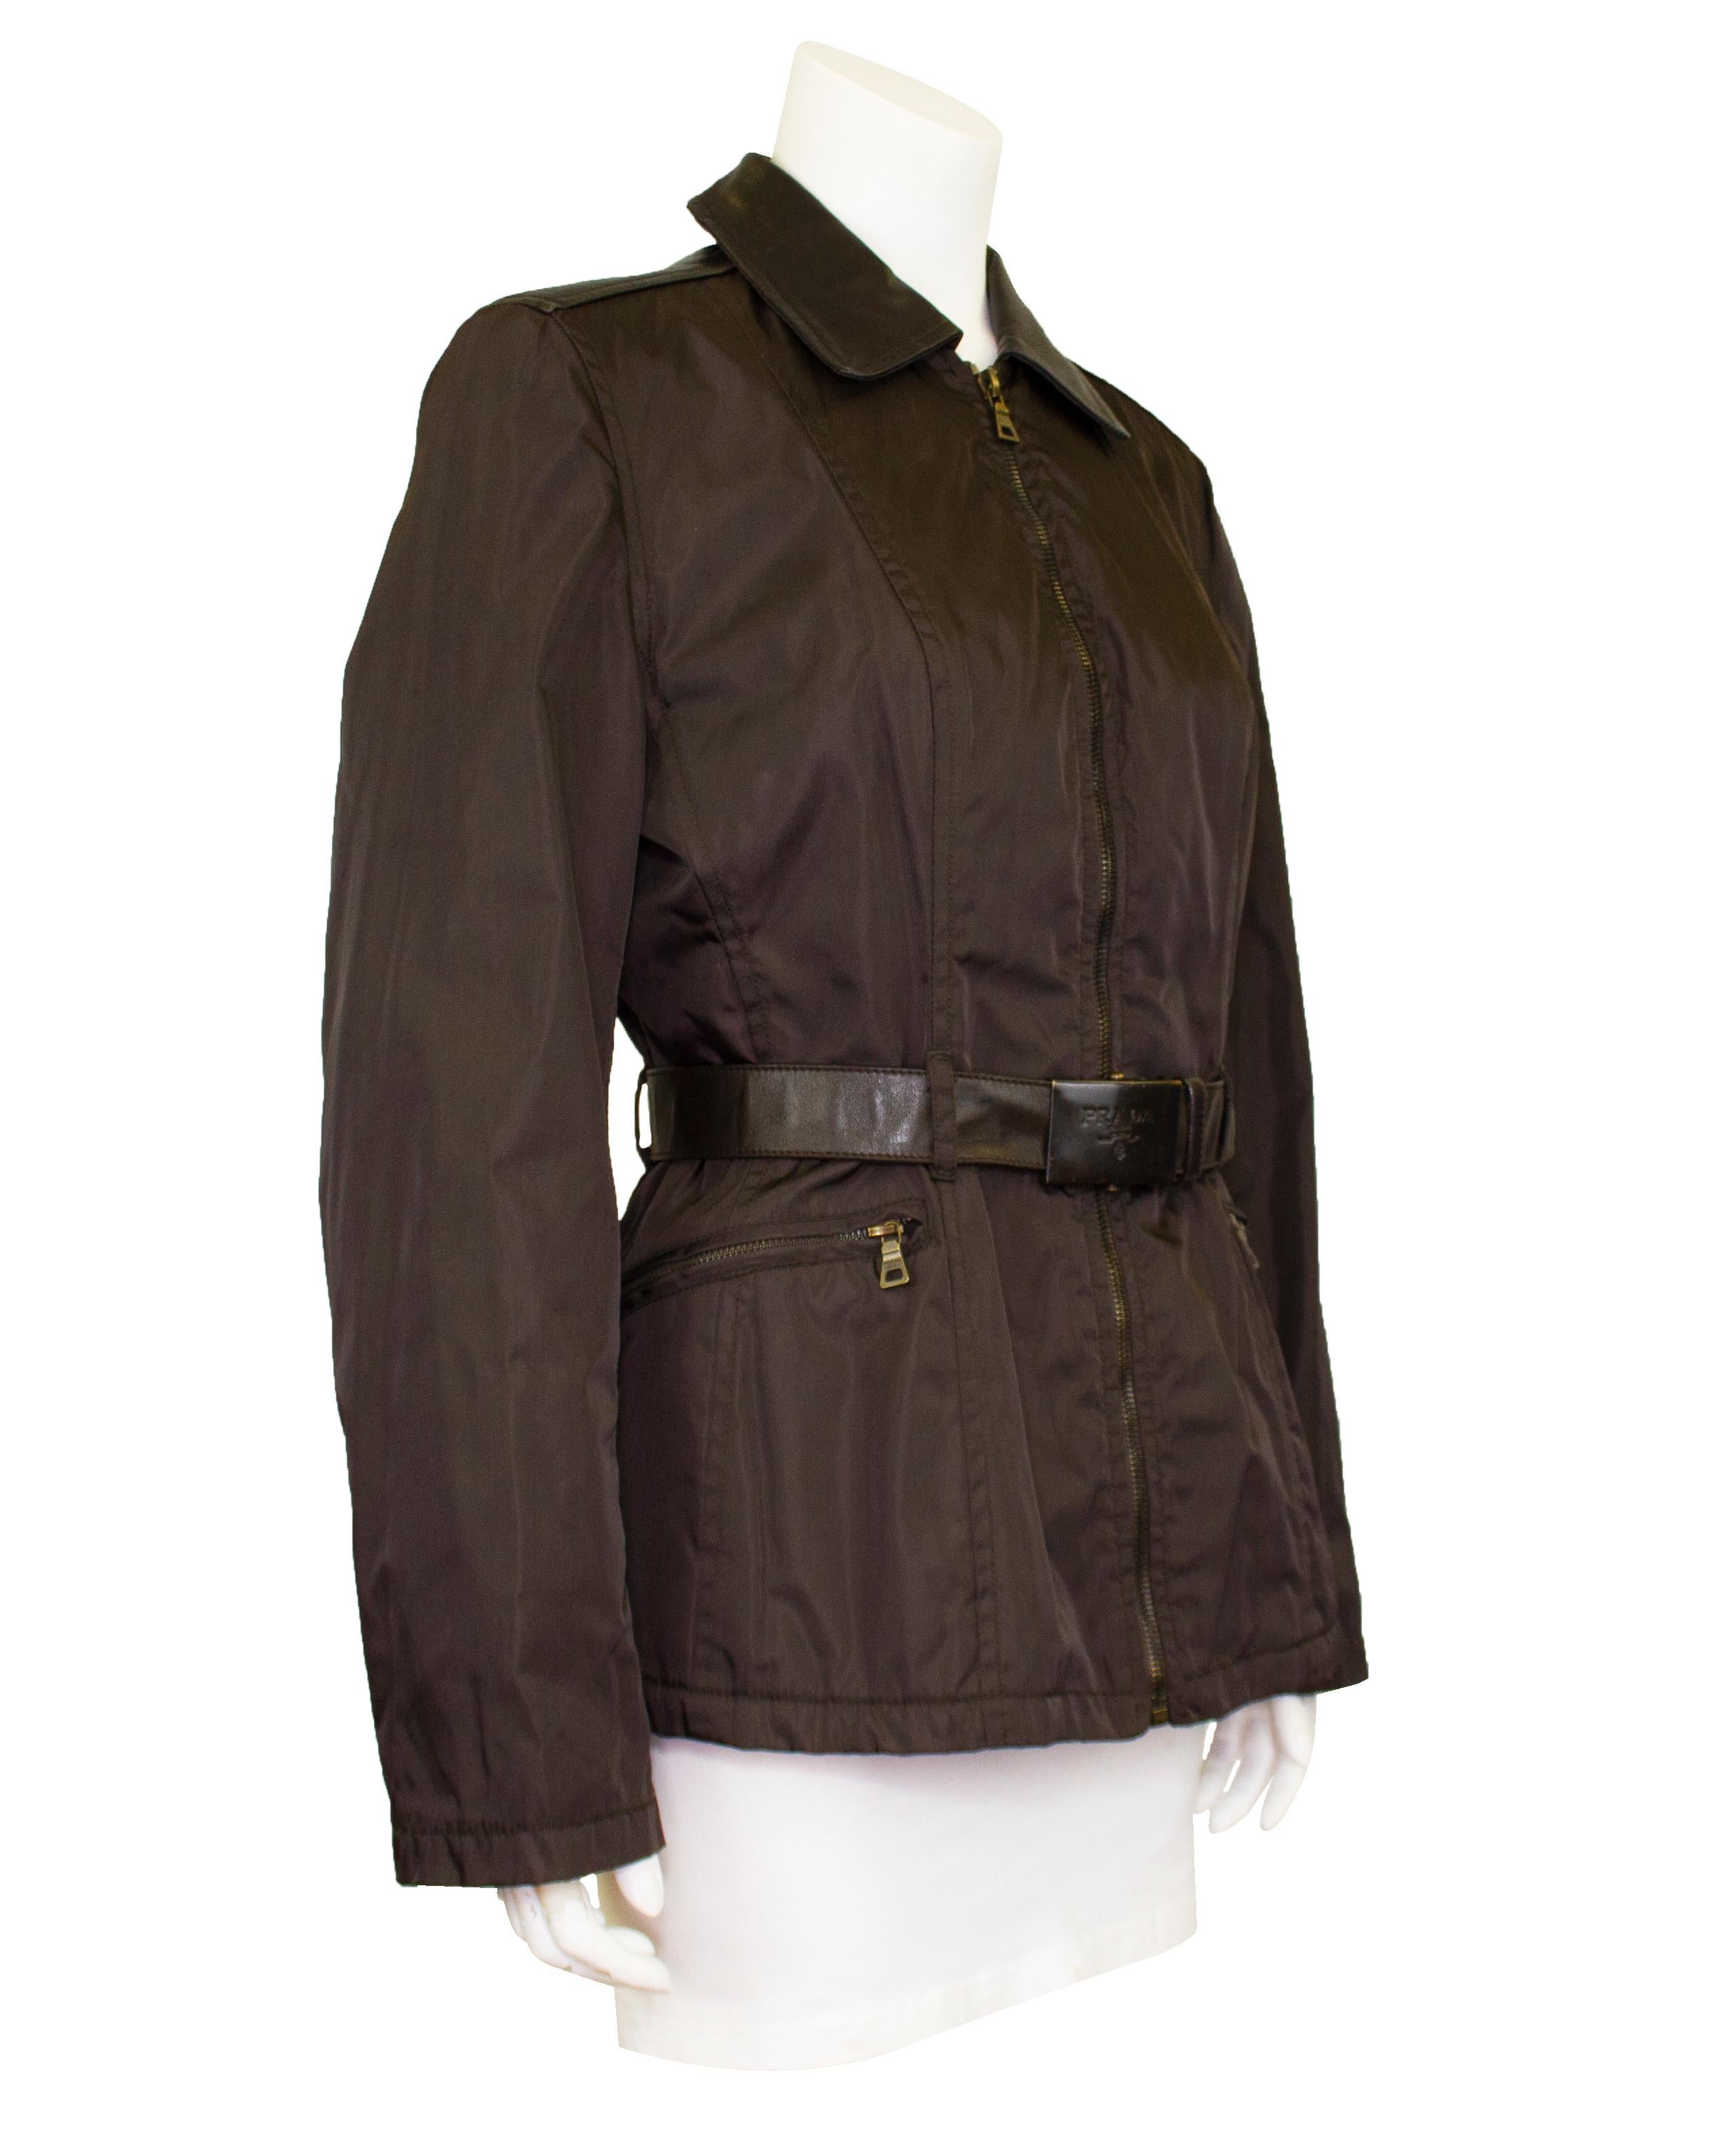 This is a great Prada jacket from the early 1990s. The arms and body of this piece are constructed from the iconic Prada nylon, while the collar, shoulders and belt are supple brown leather. The perfect mix between utility and fashion, this jacket